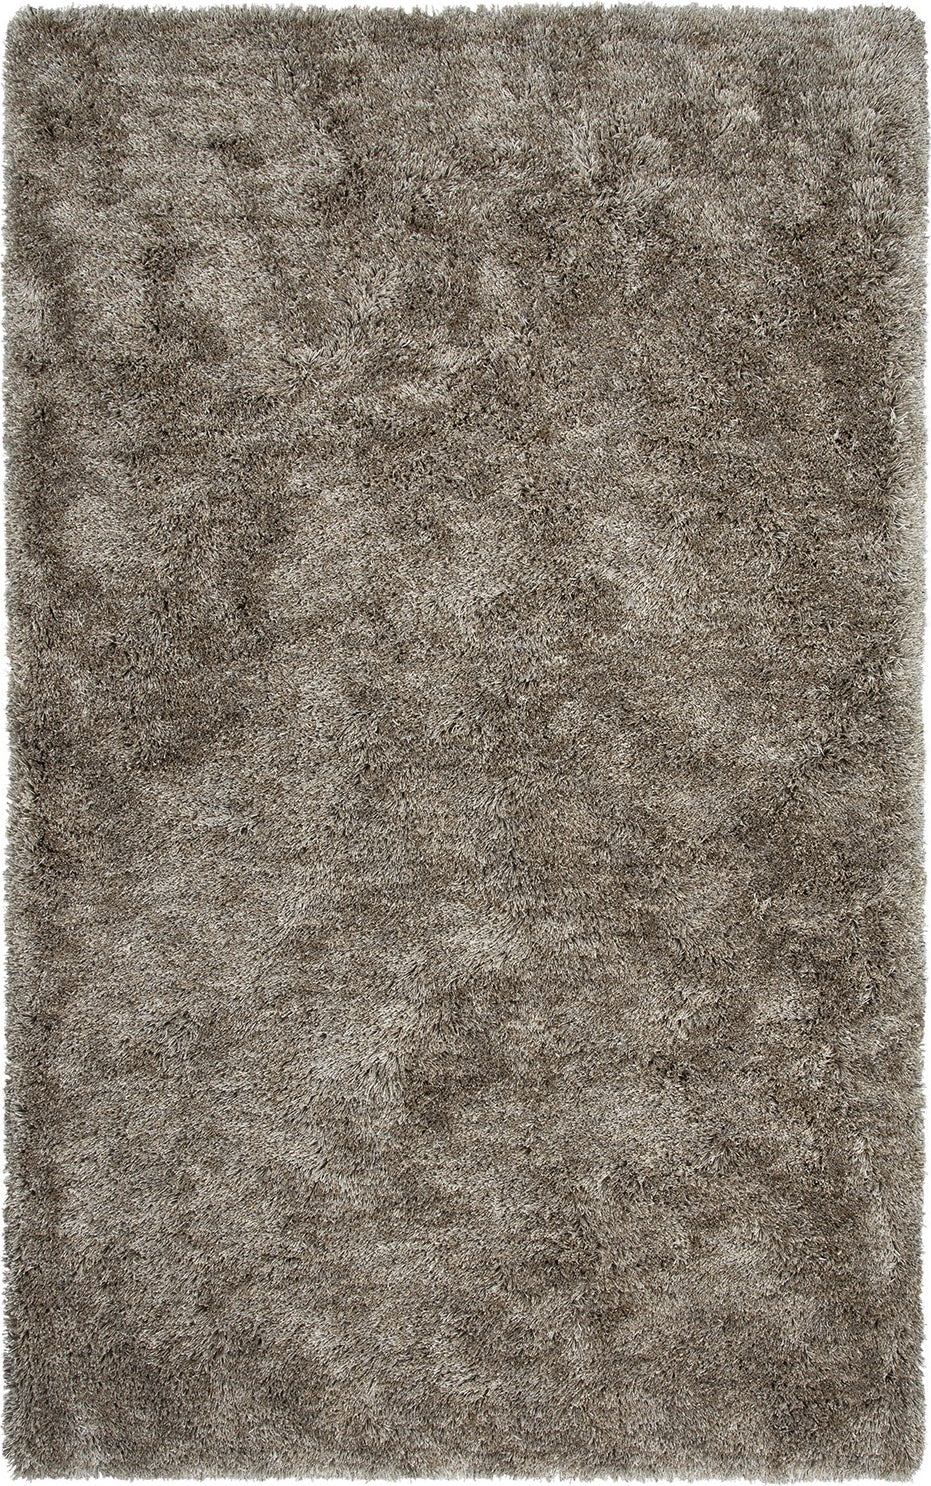 Rizzy Whistler WIS104 Neutral Area Rug main image